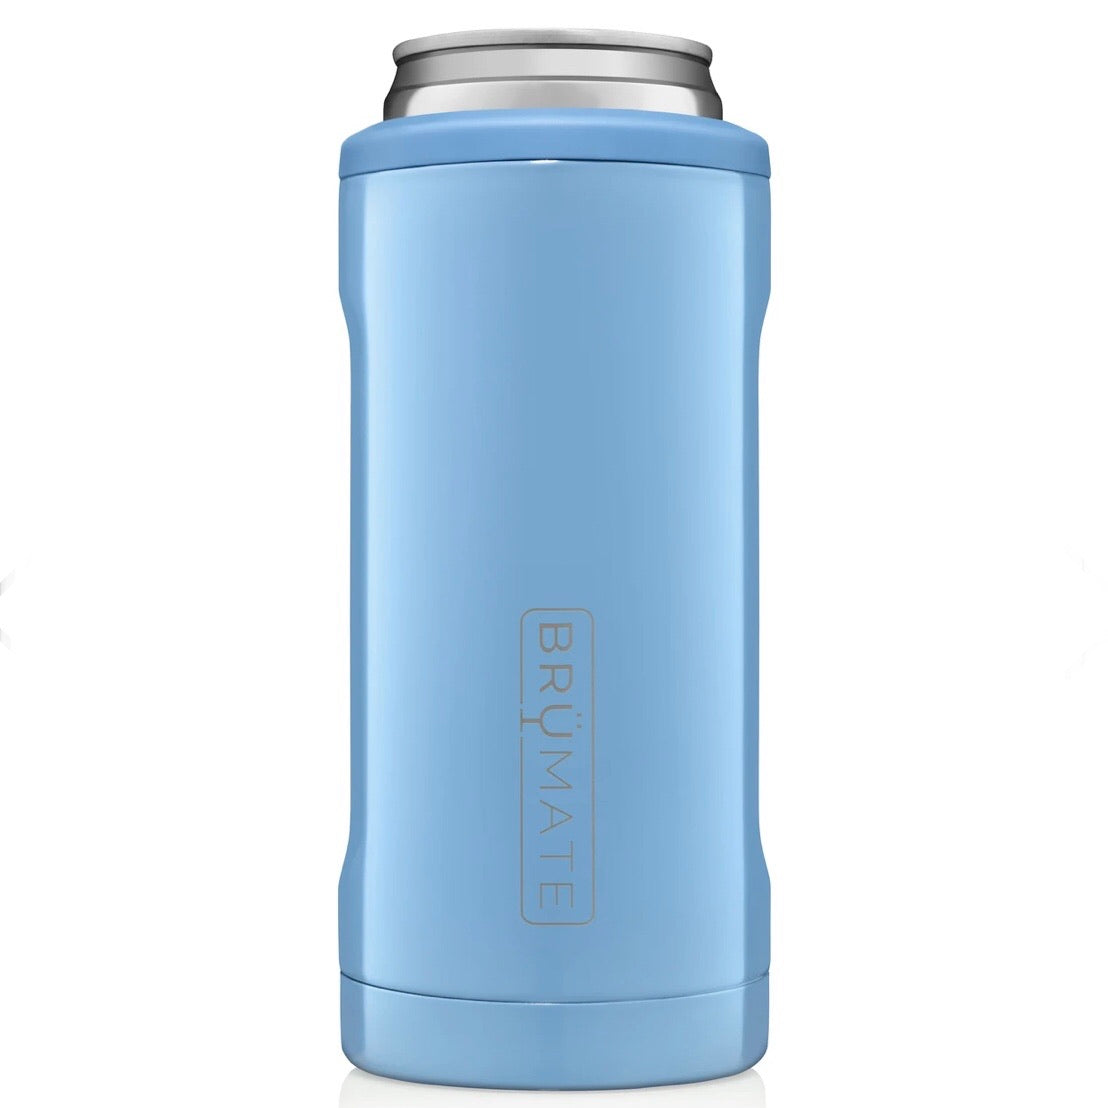 slim cans leak-proof drinkware hot to cold insulated drinkware tumbler like yeti brumate spillproof blue